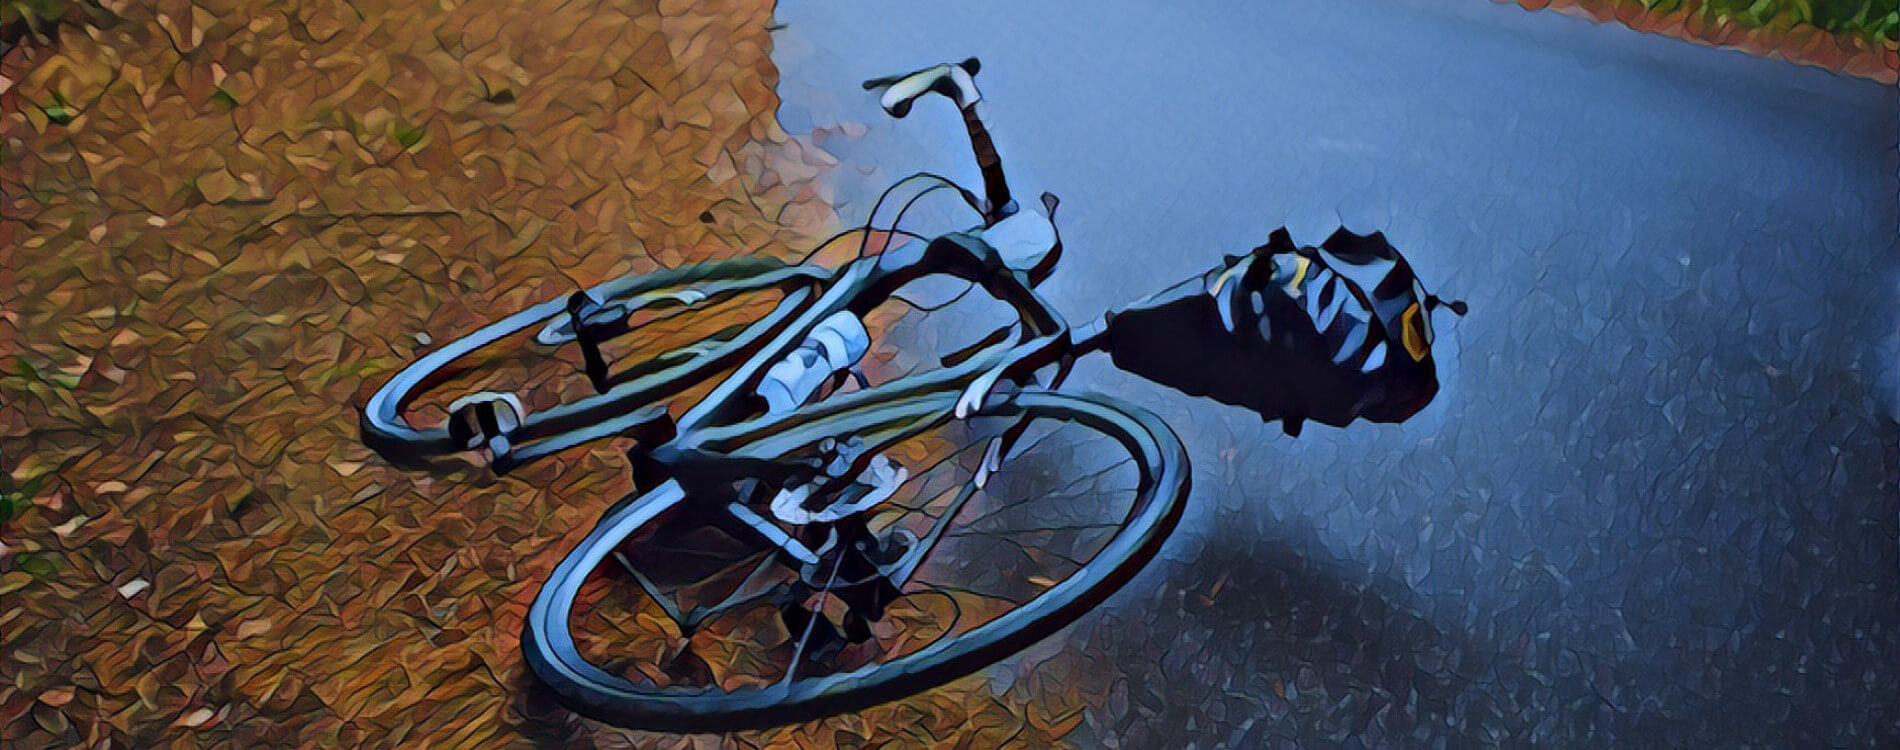 Bicycle Accident Injury Lawyers in SF: Case Background